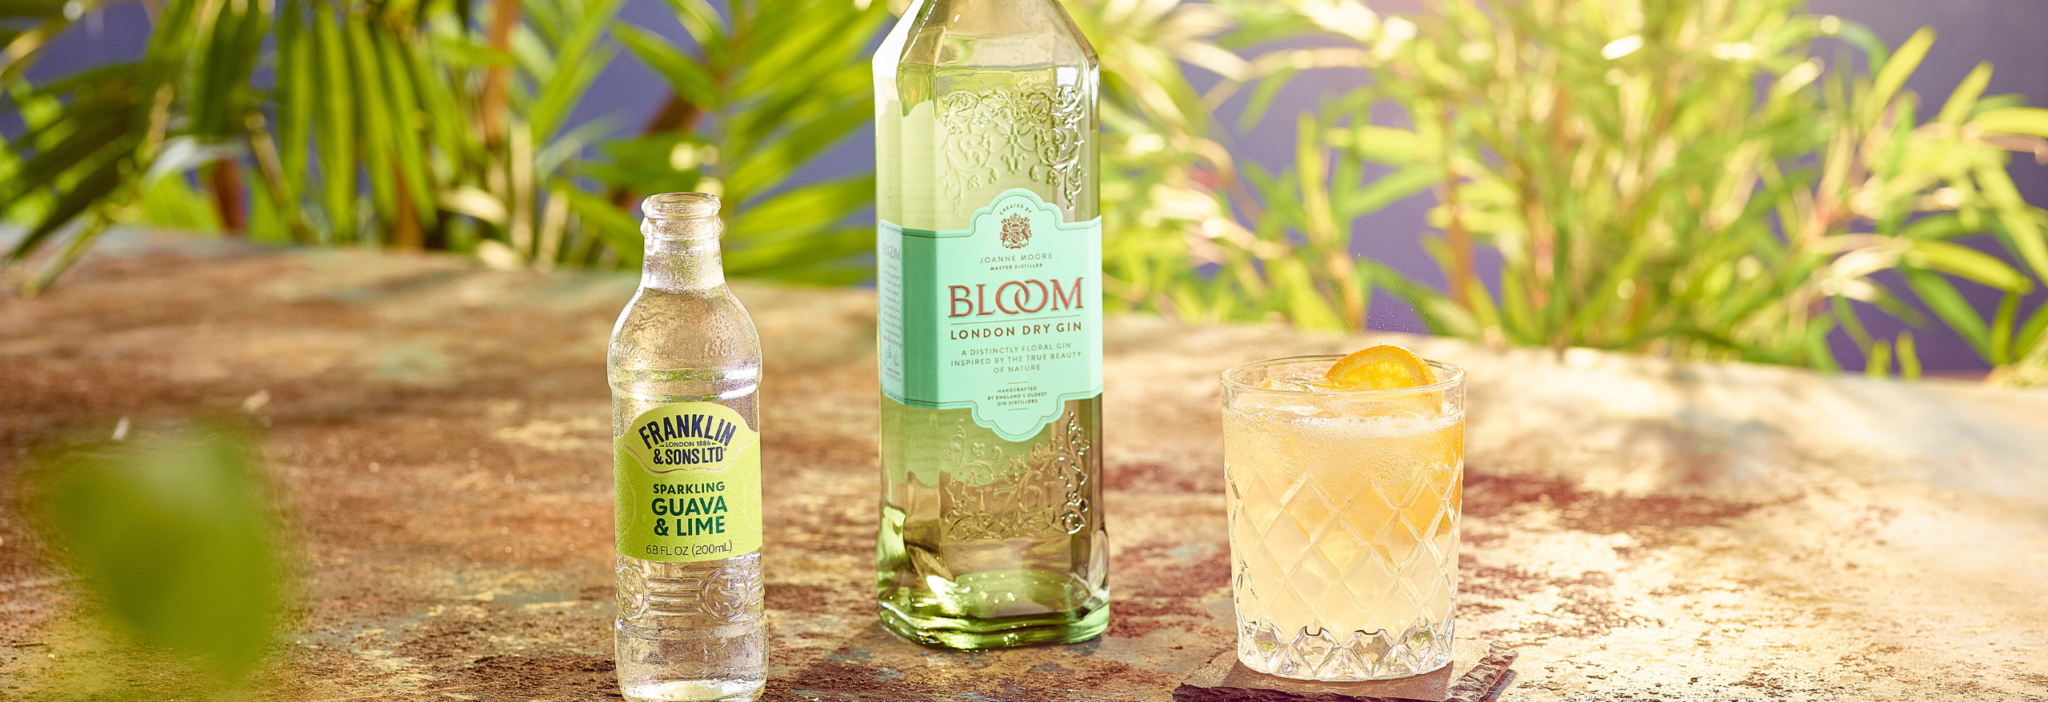 Summer Spritz cocktail recipe next to Franklin & Sons Sparkling Guava & Lime | Franklin & Sons US